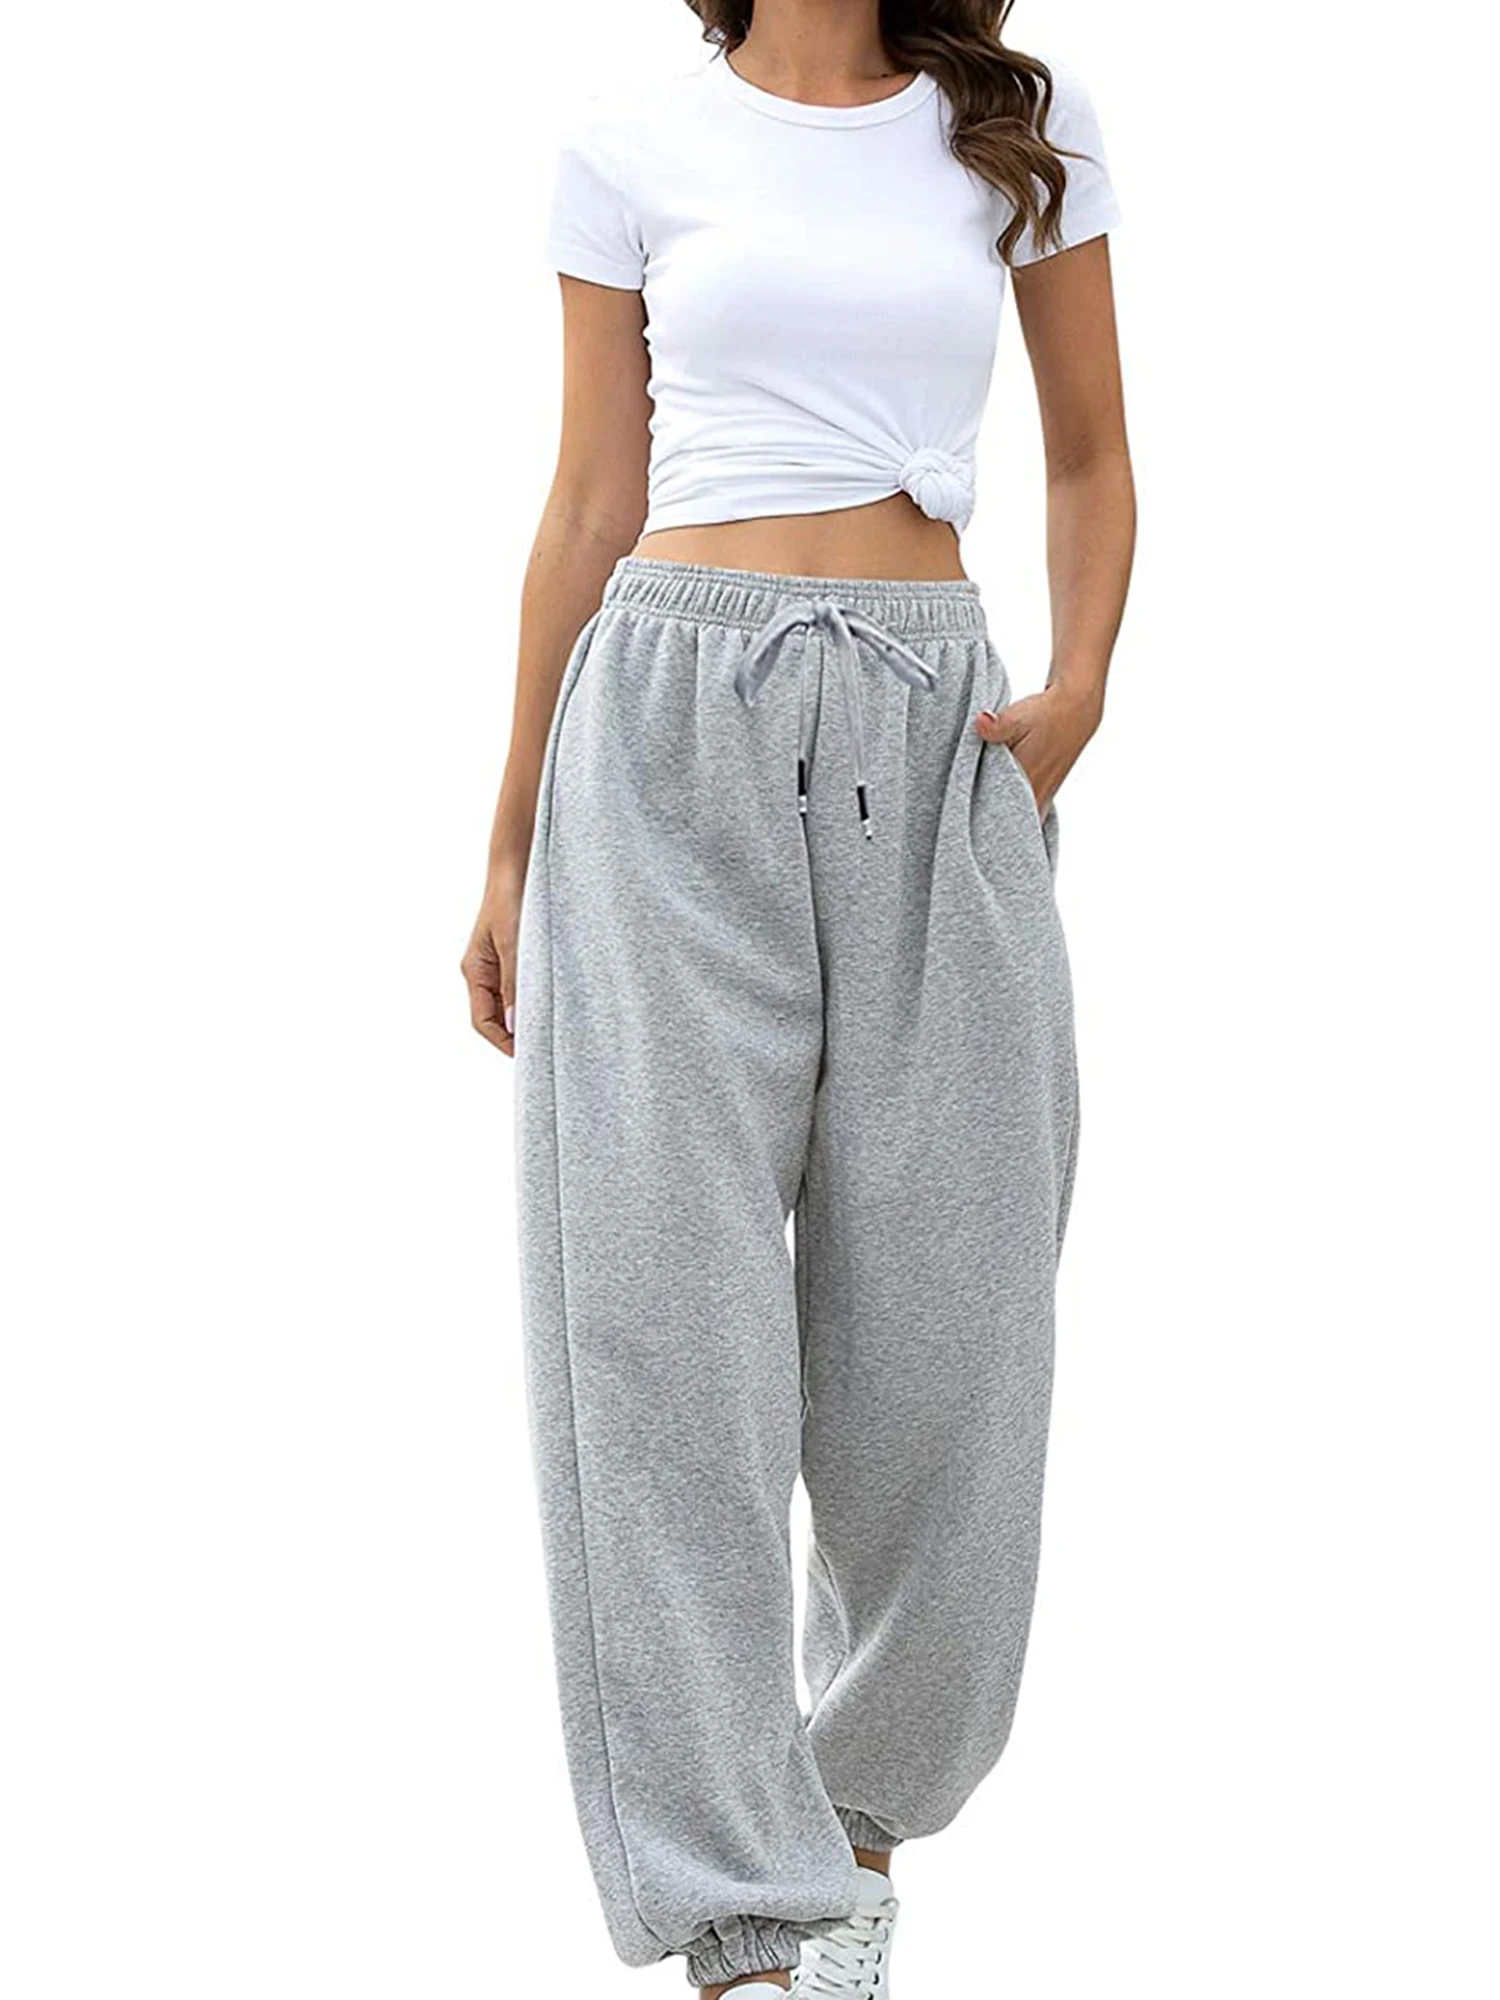 

Funny Halloween Pumpkin Print High Waisted Women s Sweatpants with Pockets - Loose Fit Trousers featuring Cinch Bottom